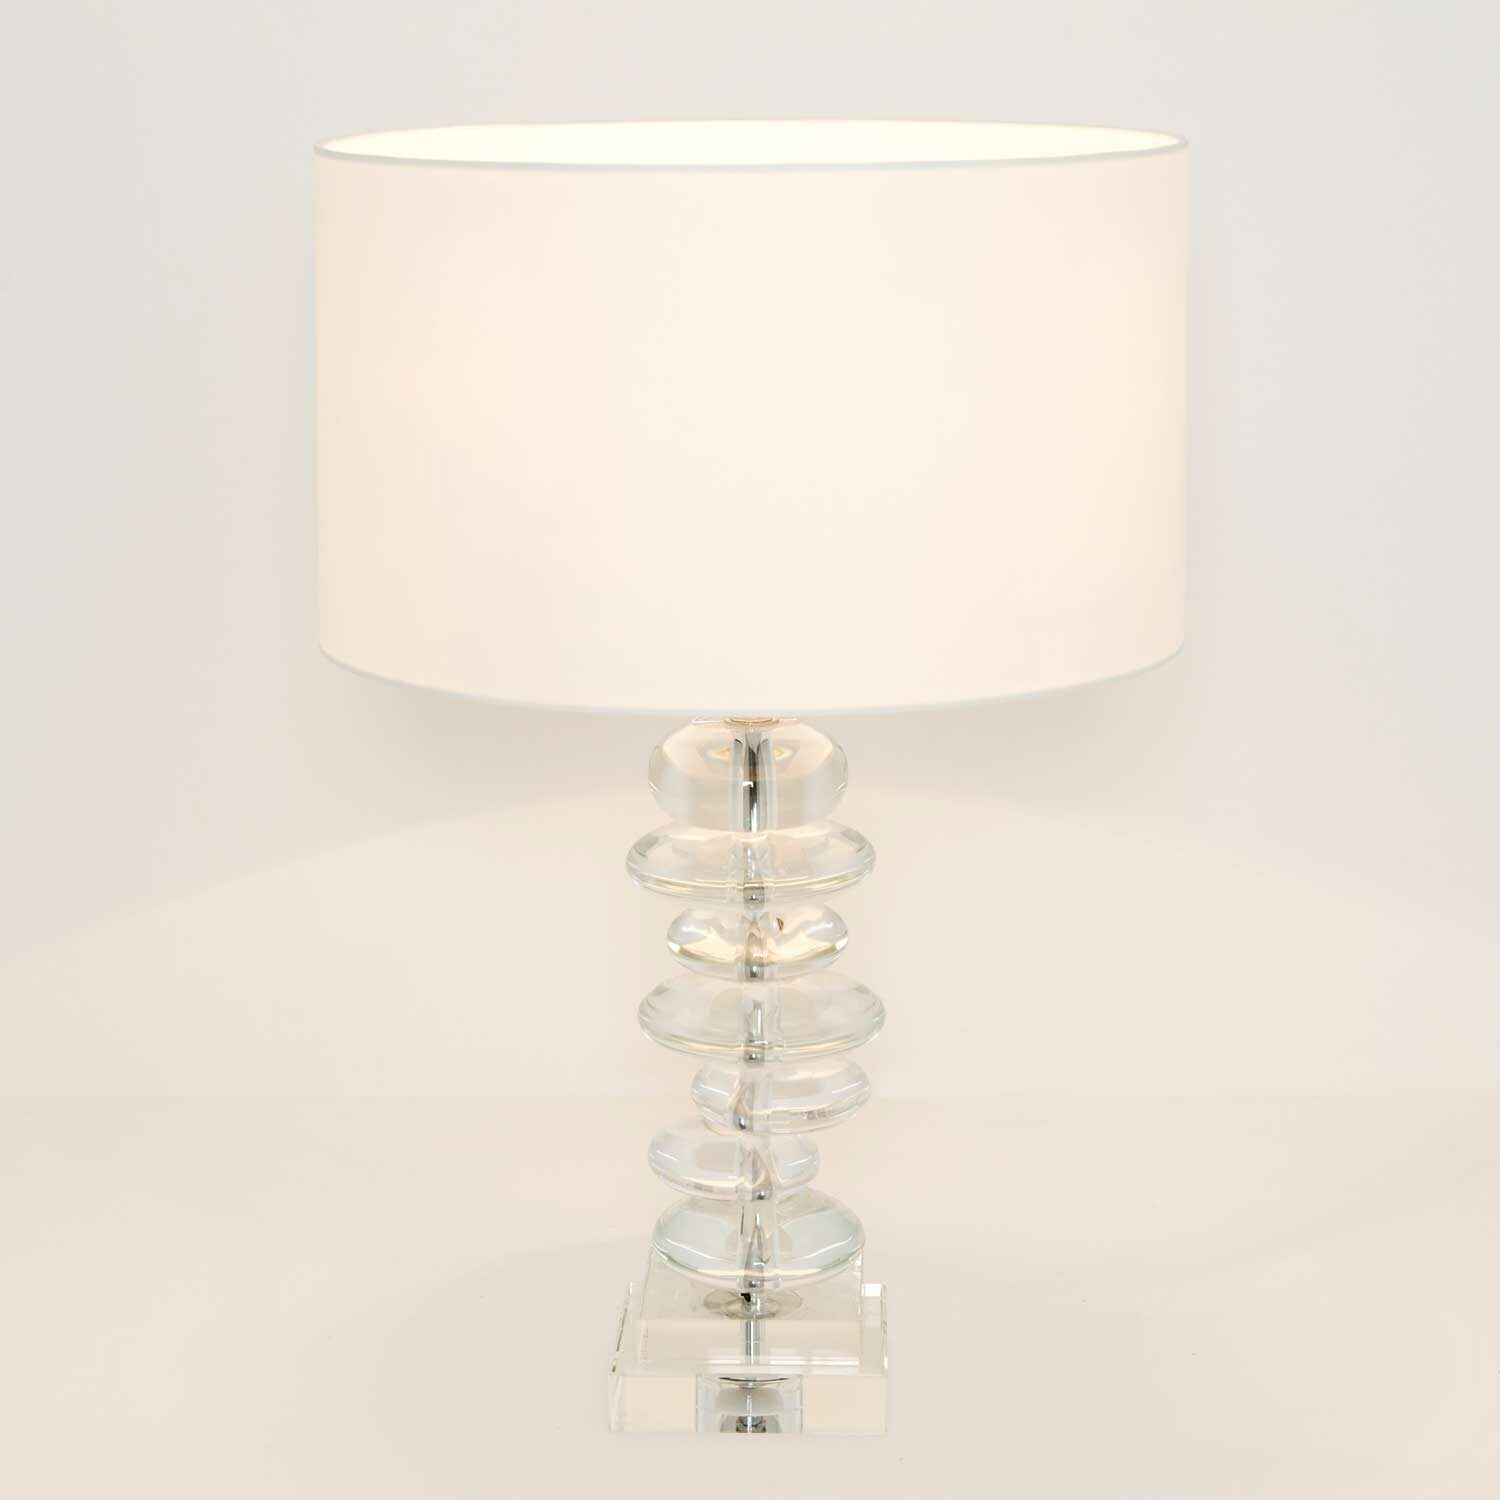 TEMPO table lamp